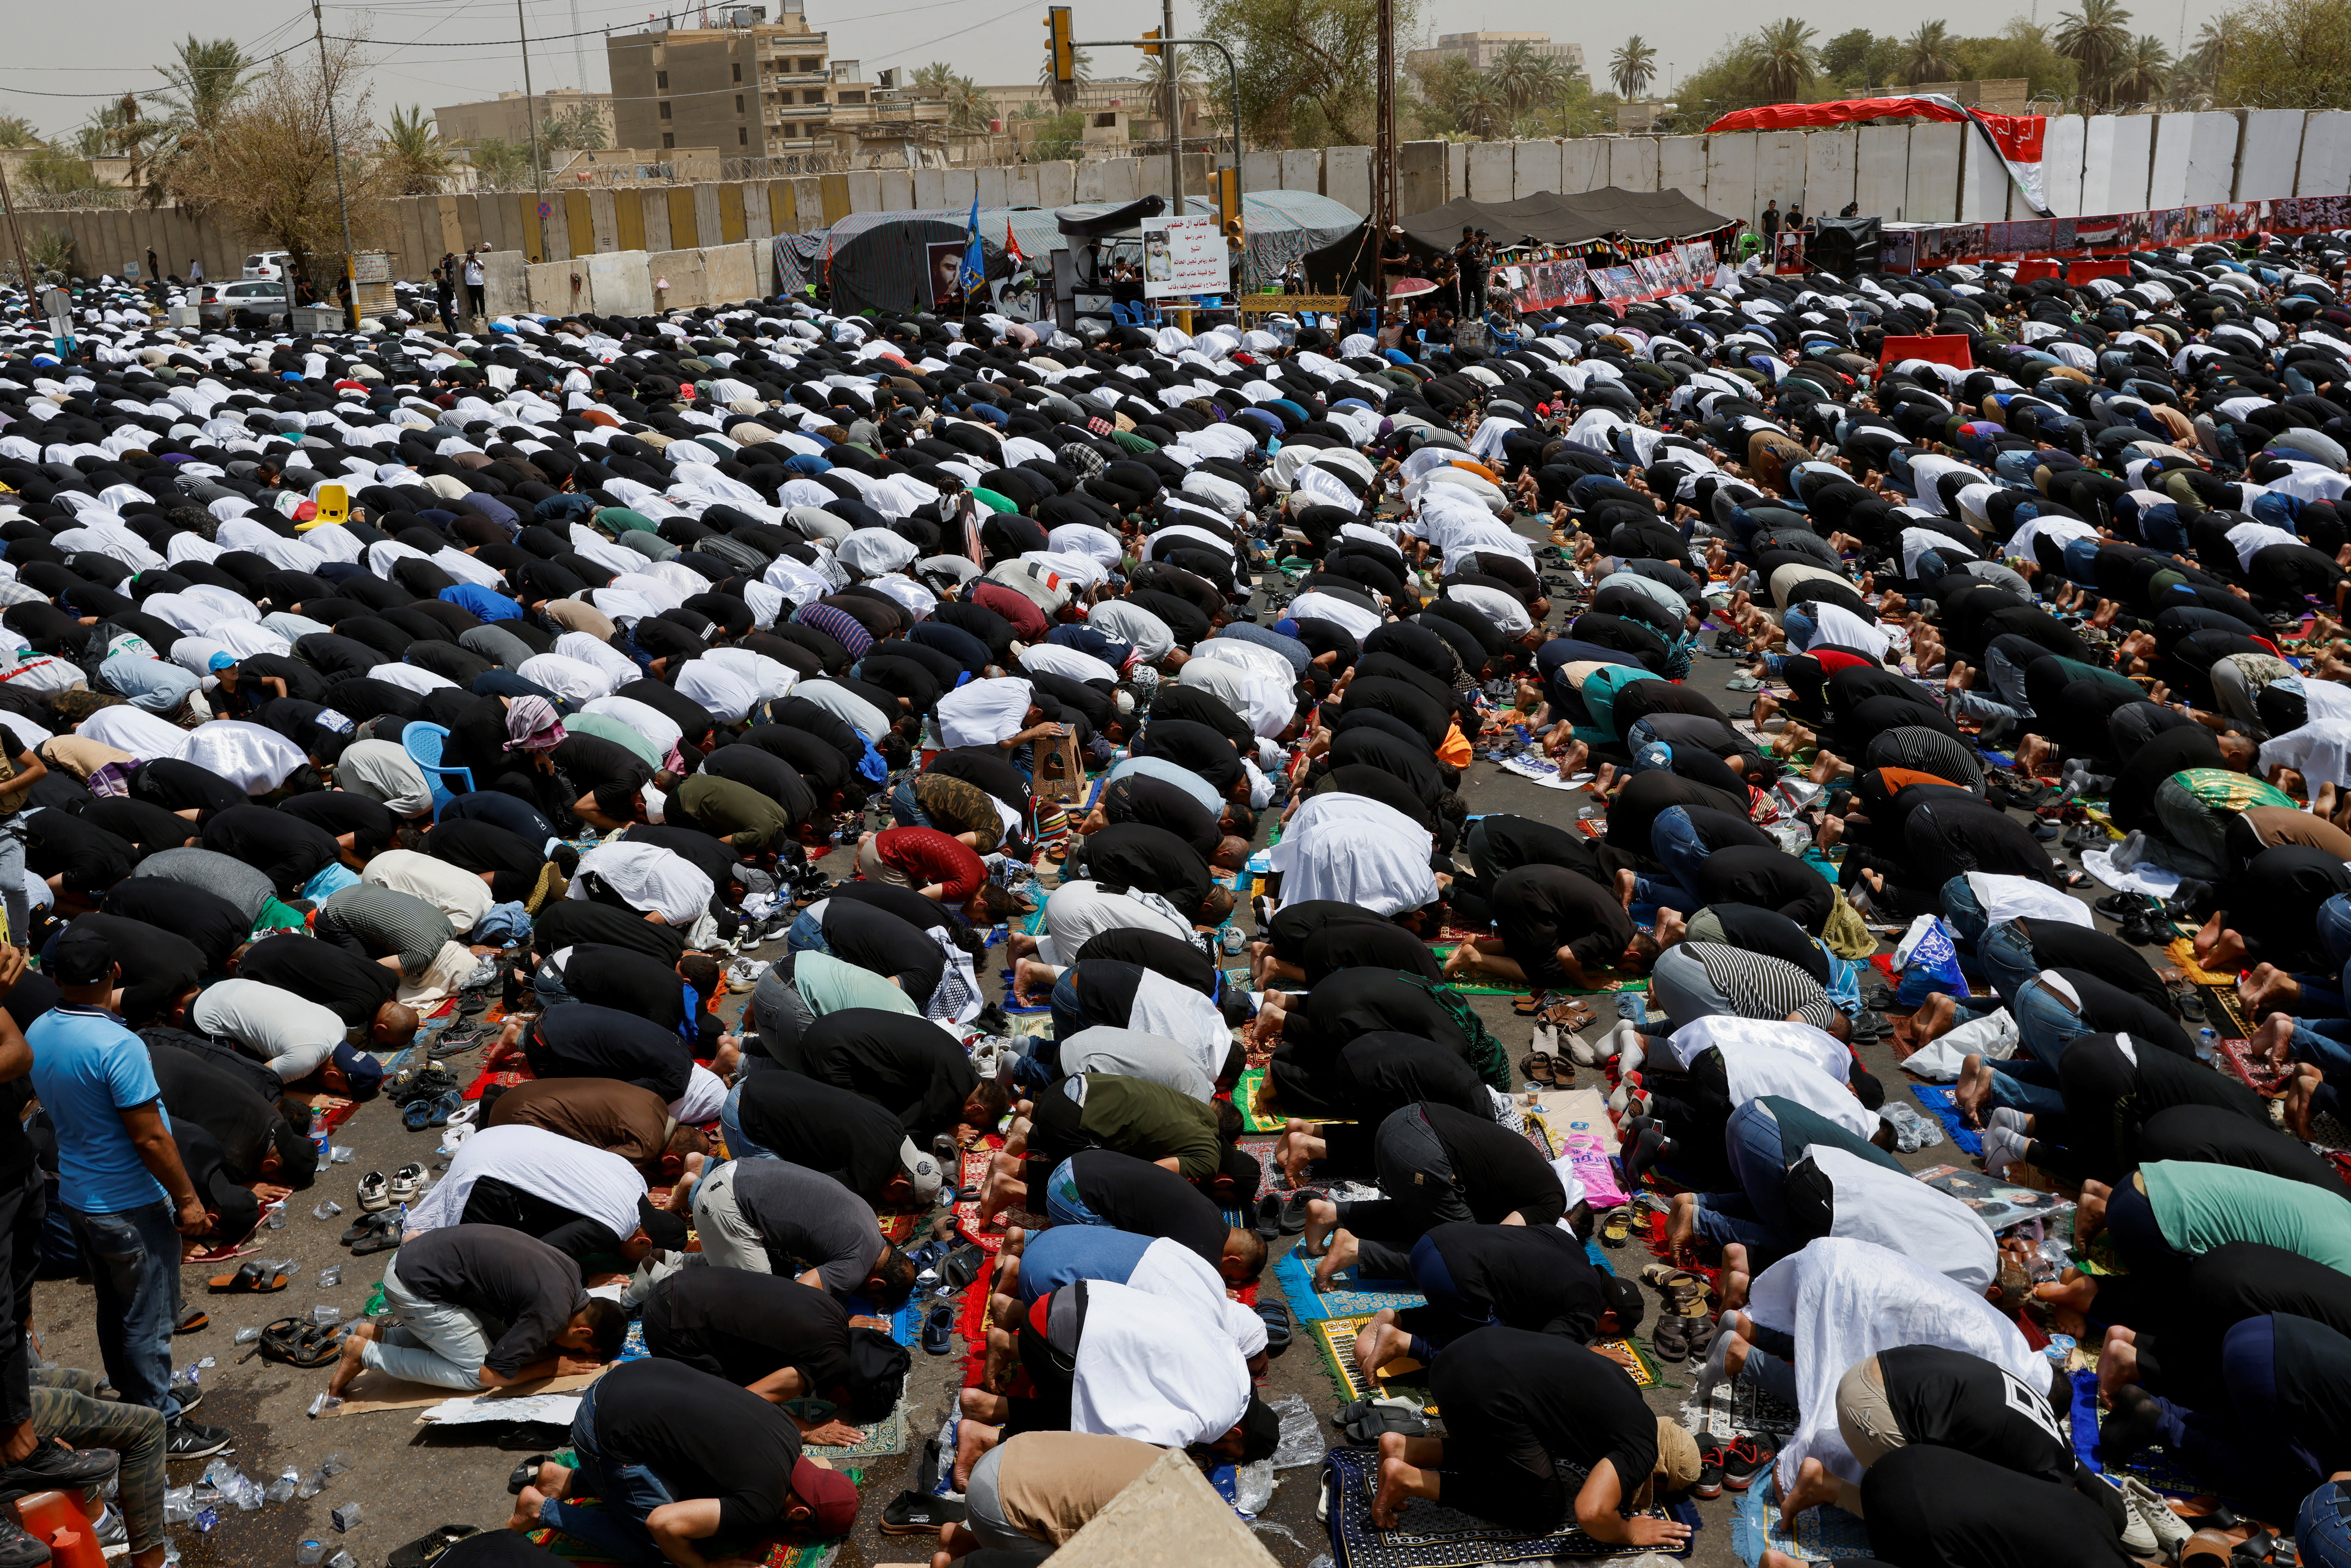 Supporters of Iraqi populist leader Moqtada al-Sadr gather for mass Friday prayer in front of parliament, in Baghdad